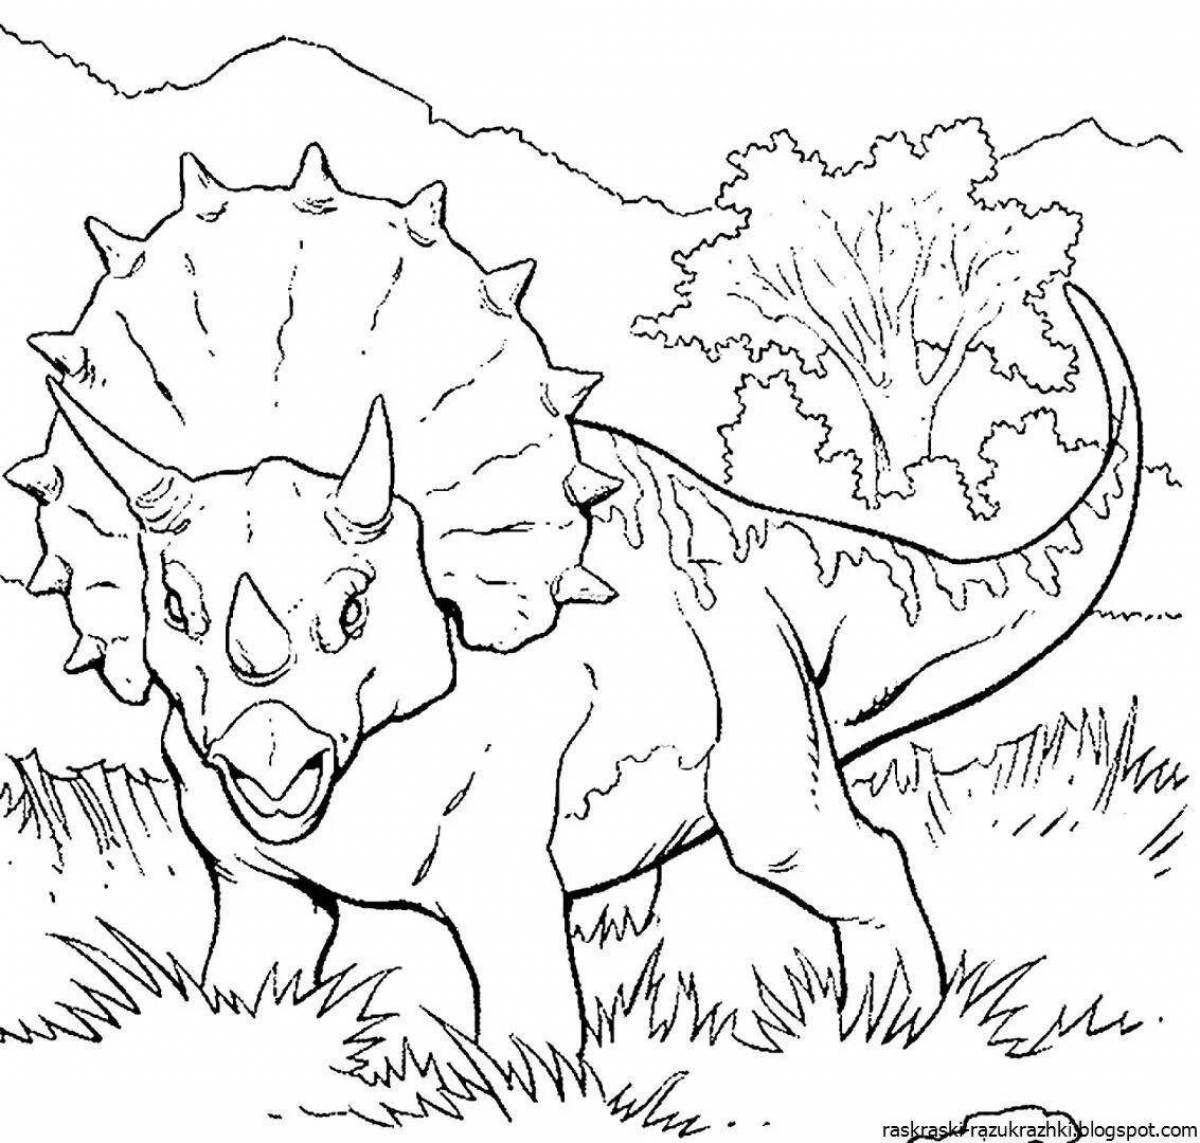 Exciting dinosaur coloring pages for 4-5 year olds